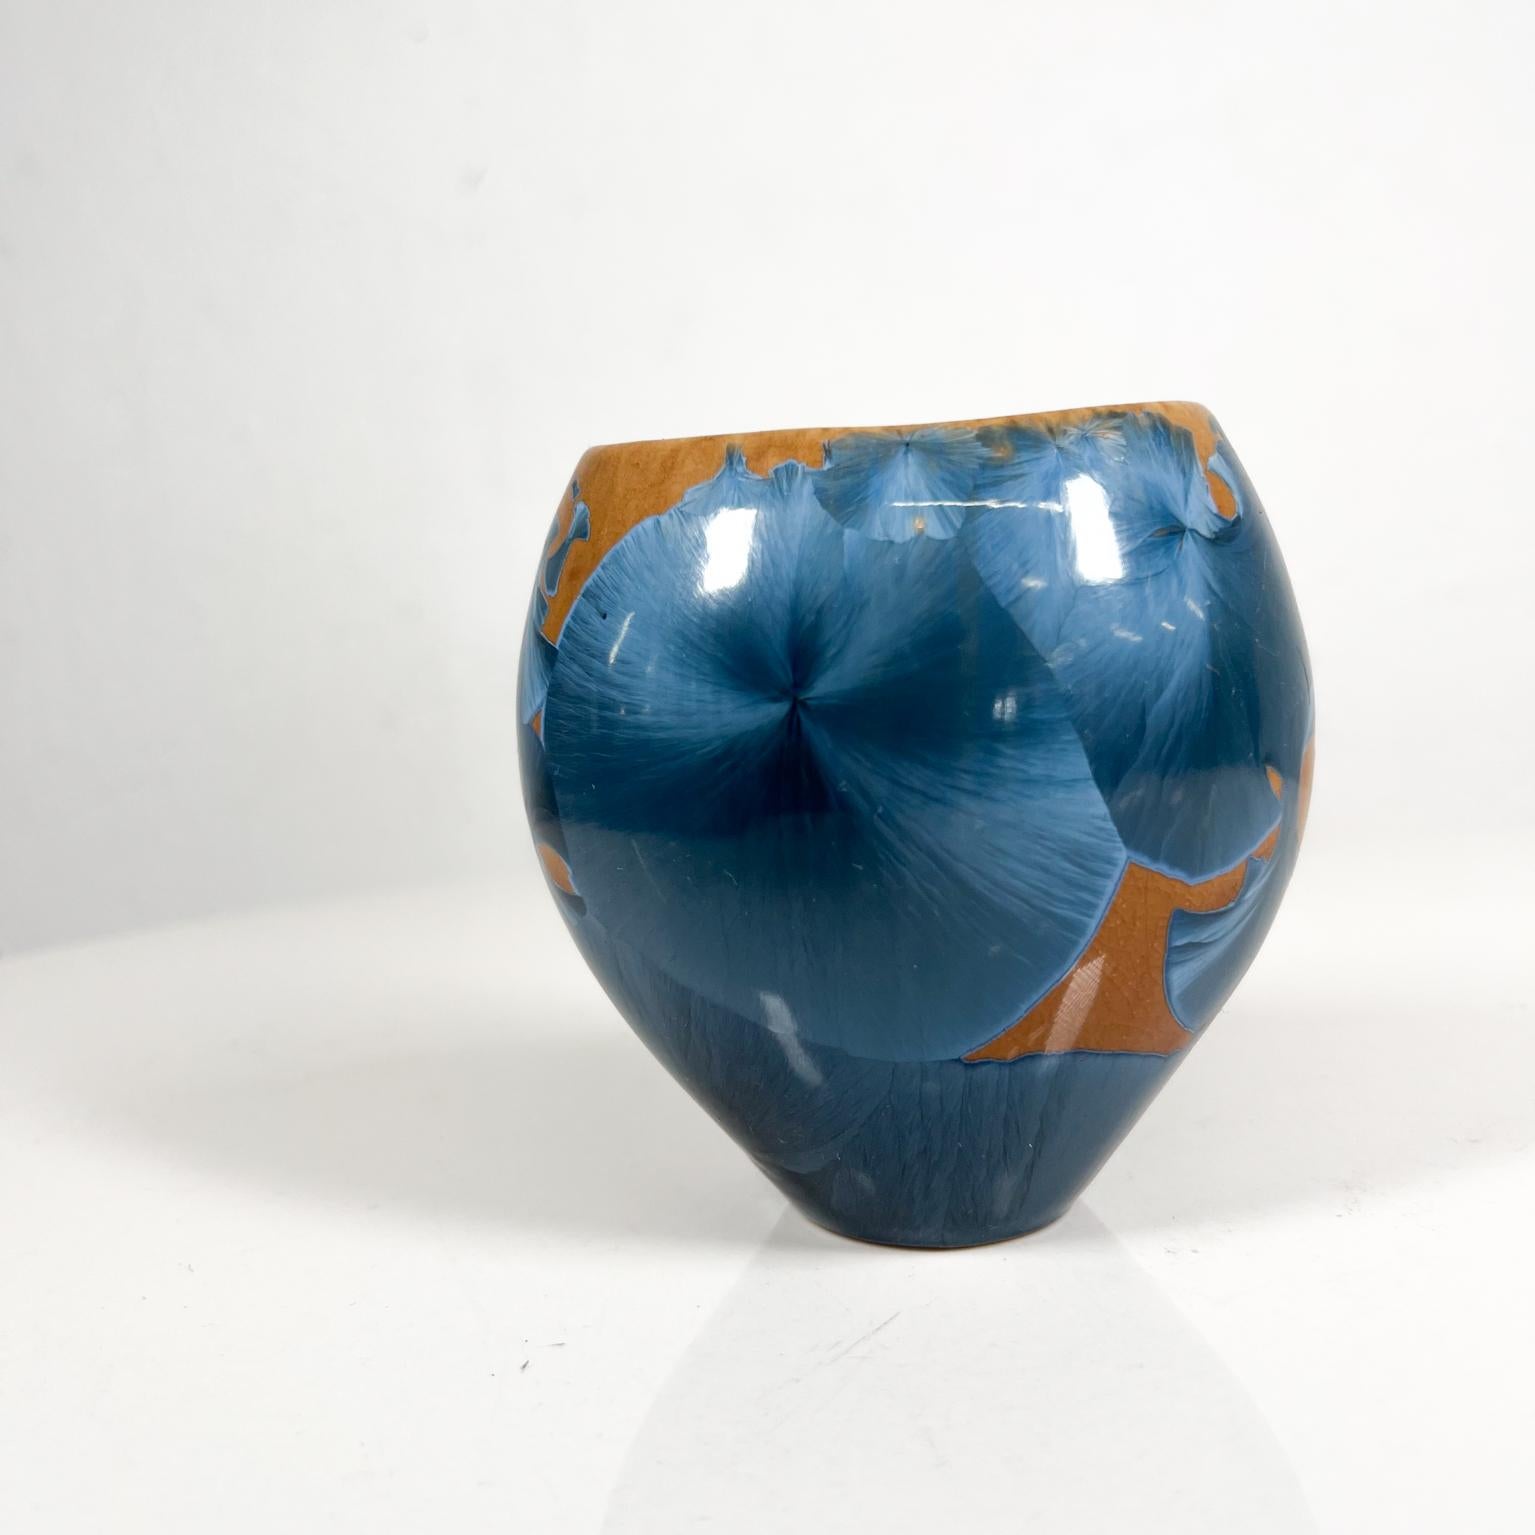 1970s Psychedelic Art Pottery Crystalline Vase Louis Reding In Good Condition For Sale In Chula Vista, CA